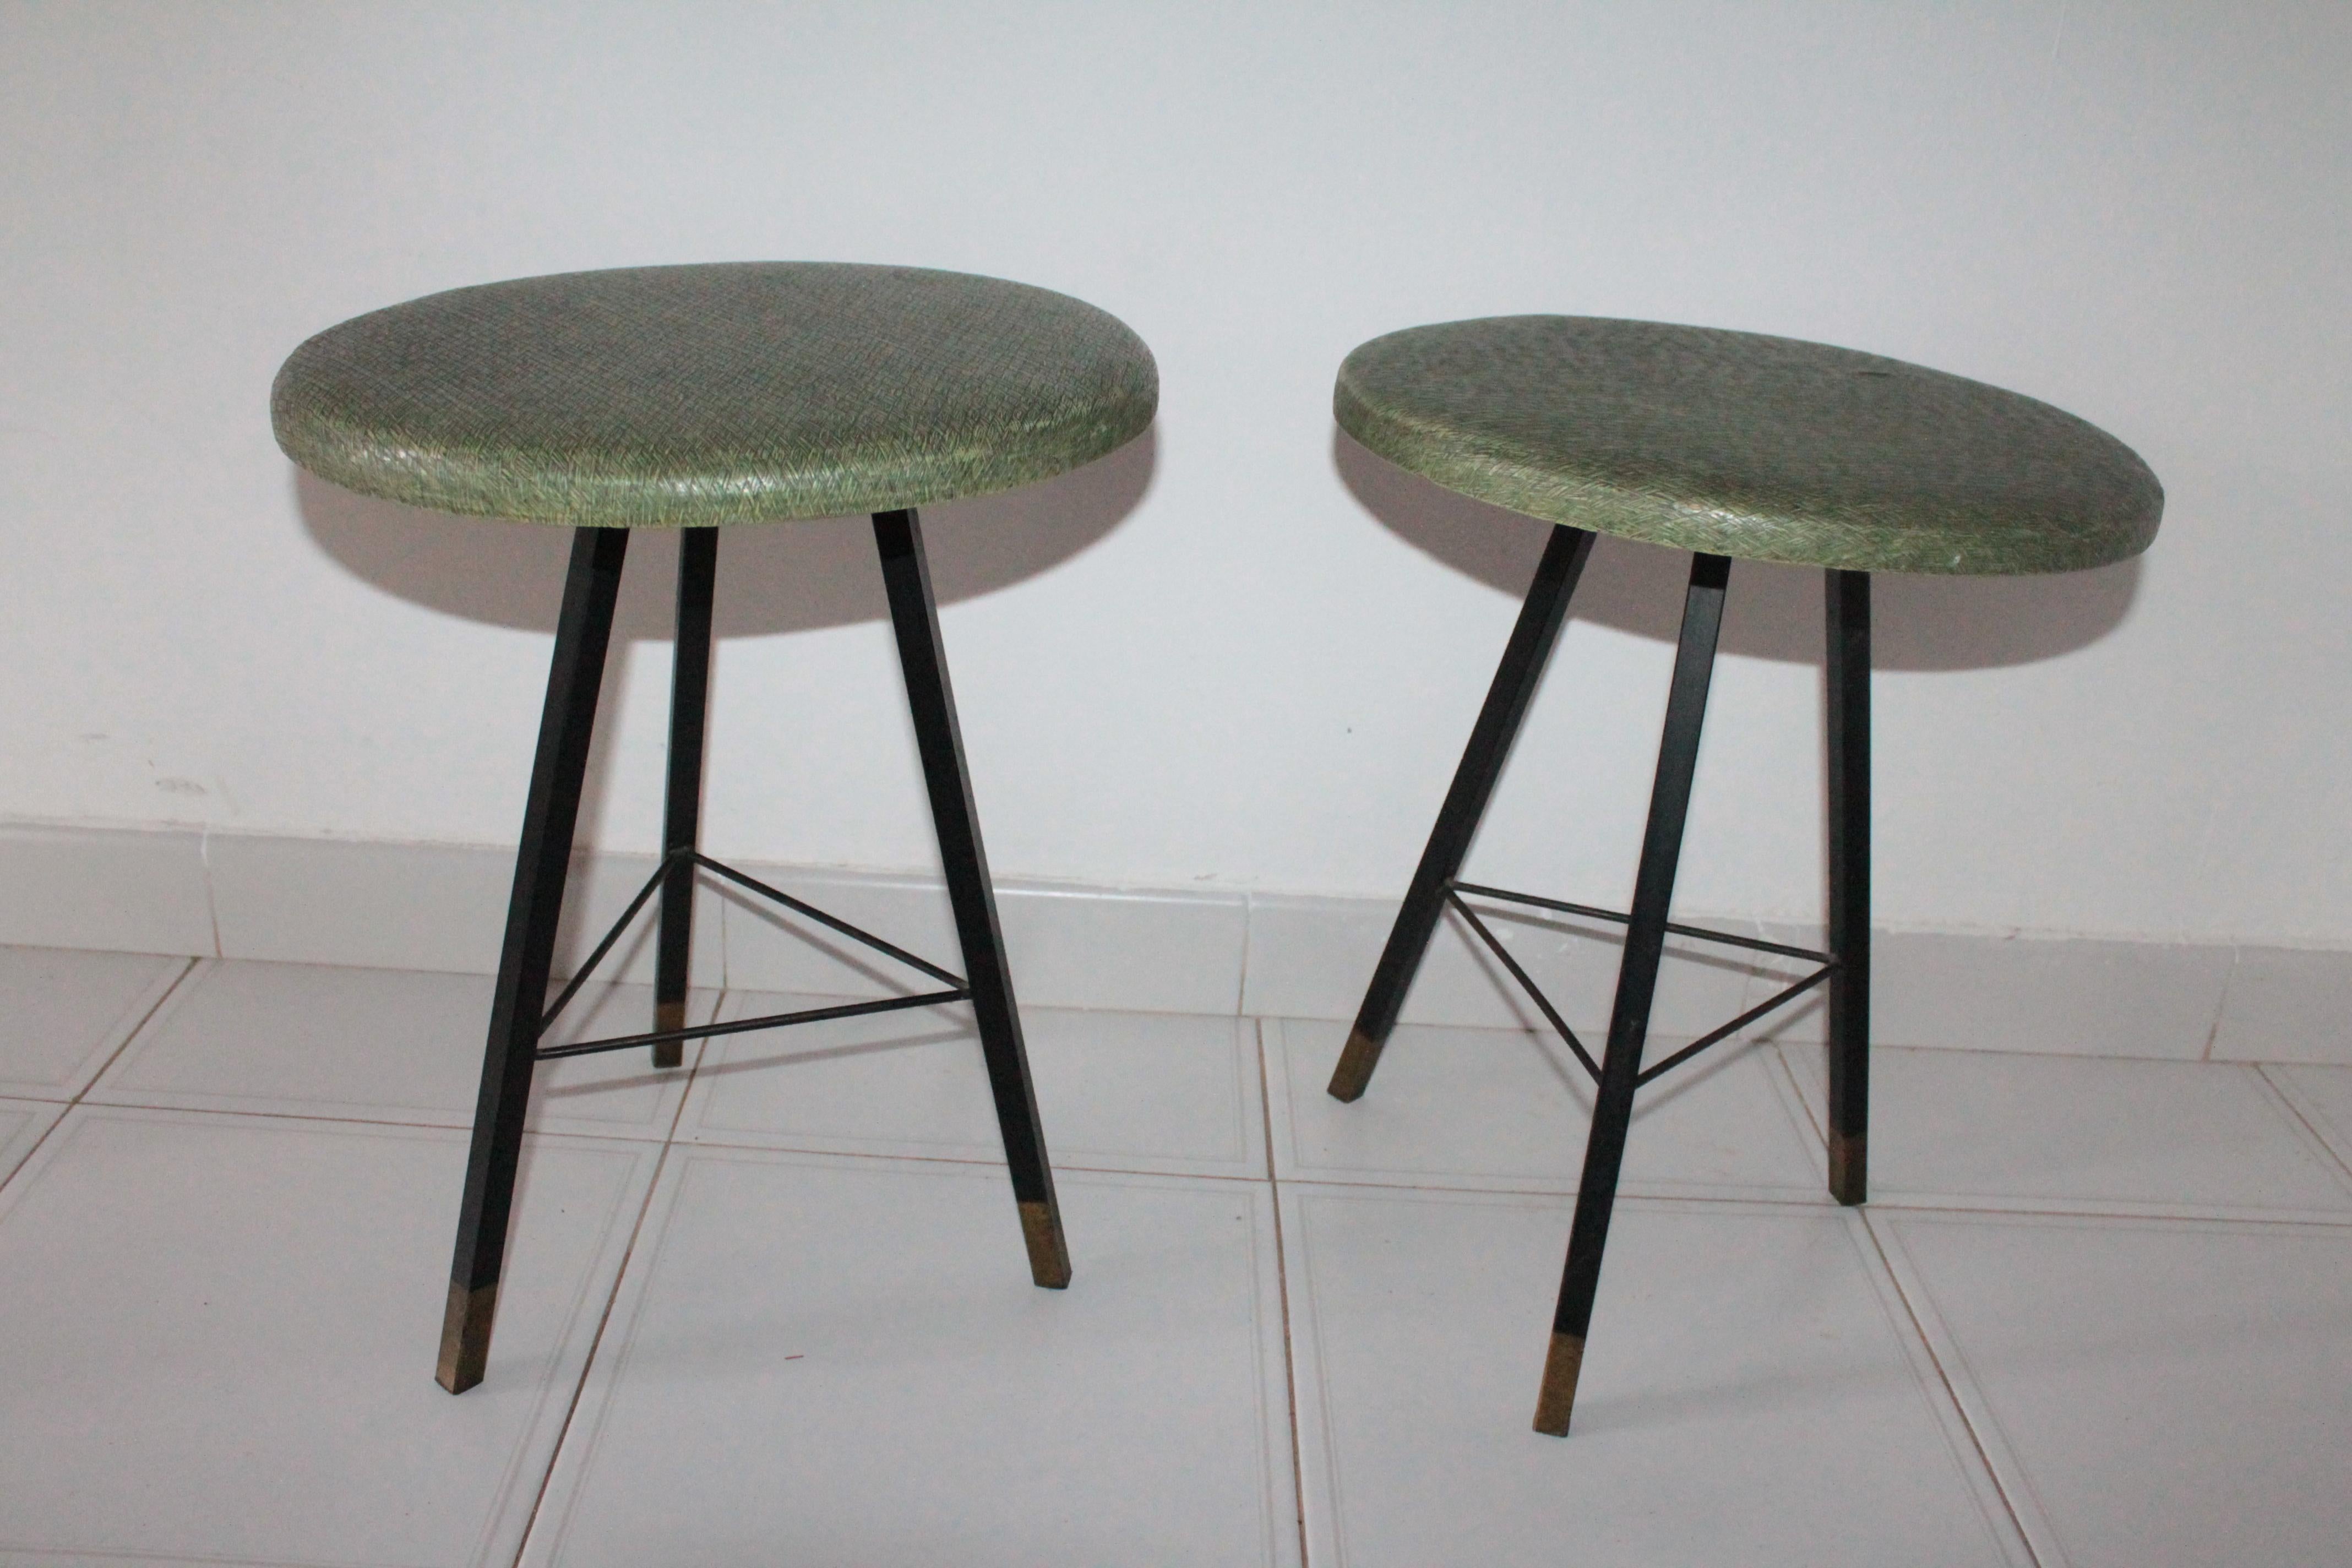 Set of 2 exceptional stools black tripod iron and brass, Italy, circa 1950.
Original fabric with small cut, you can have them completely original of the time, or you can decide the color and the fabric you prefer.